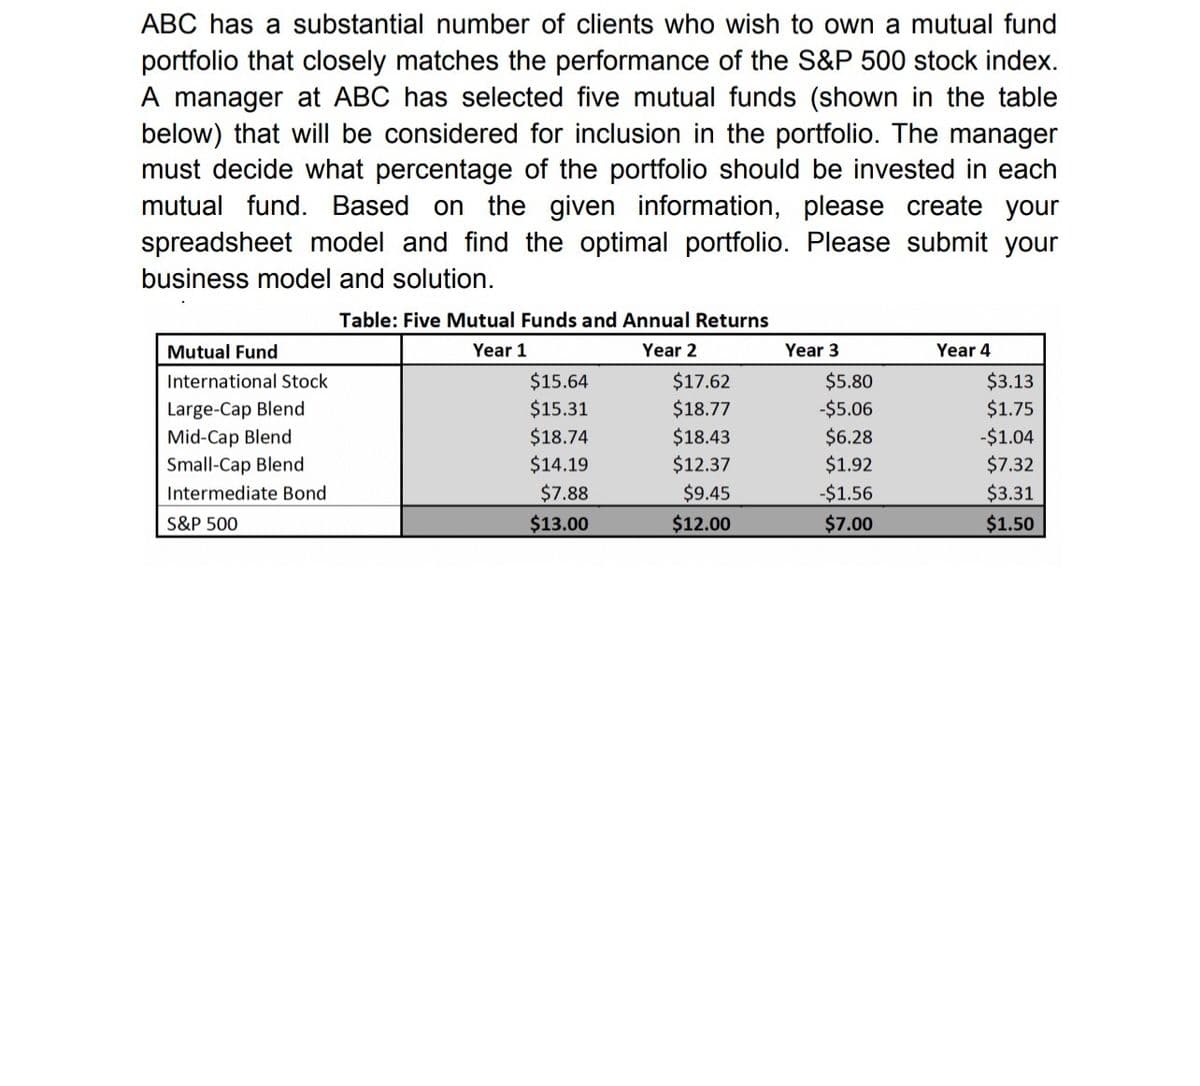 ABC has a substantial number of clients who wish to own a mutual fund
portfolio that closely matches the performance of the S&P 500 stock index.
A manager at ABC has selected five mutual funds (shown in the table
below) that will be considered for inclusion in the portfolio. The manager
must decide what percentage of the portfolio should be invested in each
mutual fund. Based on the given information, please create your
spreadsheet model and find the optimal portfolio. Please submit your
business model and solution.
Table: Five Mutual Funds and Annual Returns
Mutual Fund
Year 1
Year 2
Year 3
Year 4
International Stock
$15.64
$17.62
$5.80
$3.13
Large-Cap Blend
$15.31
$18.77
-$5.06
$1.75
Mid-Cap Blend
$18.74
$18.43
$6.28
-$1.04
Small-Cap Blend
$14.19
$12.37
$1.92
$7.32
Intermediate Bond
$7.88
$9.45
-$1.56
$3.31
S&P 500
$13.00
$12.00
$7.00
$1.50